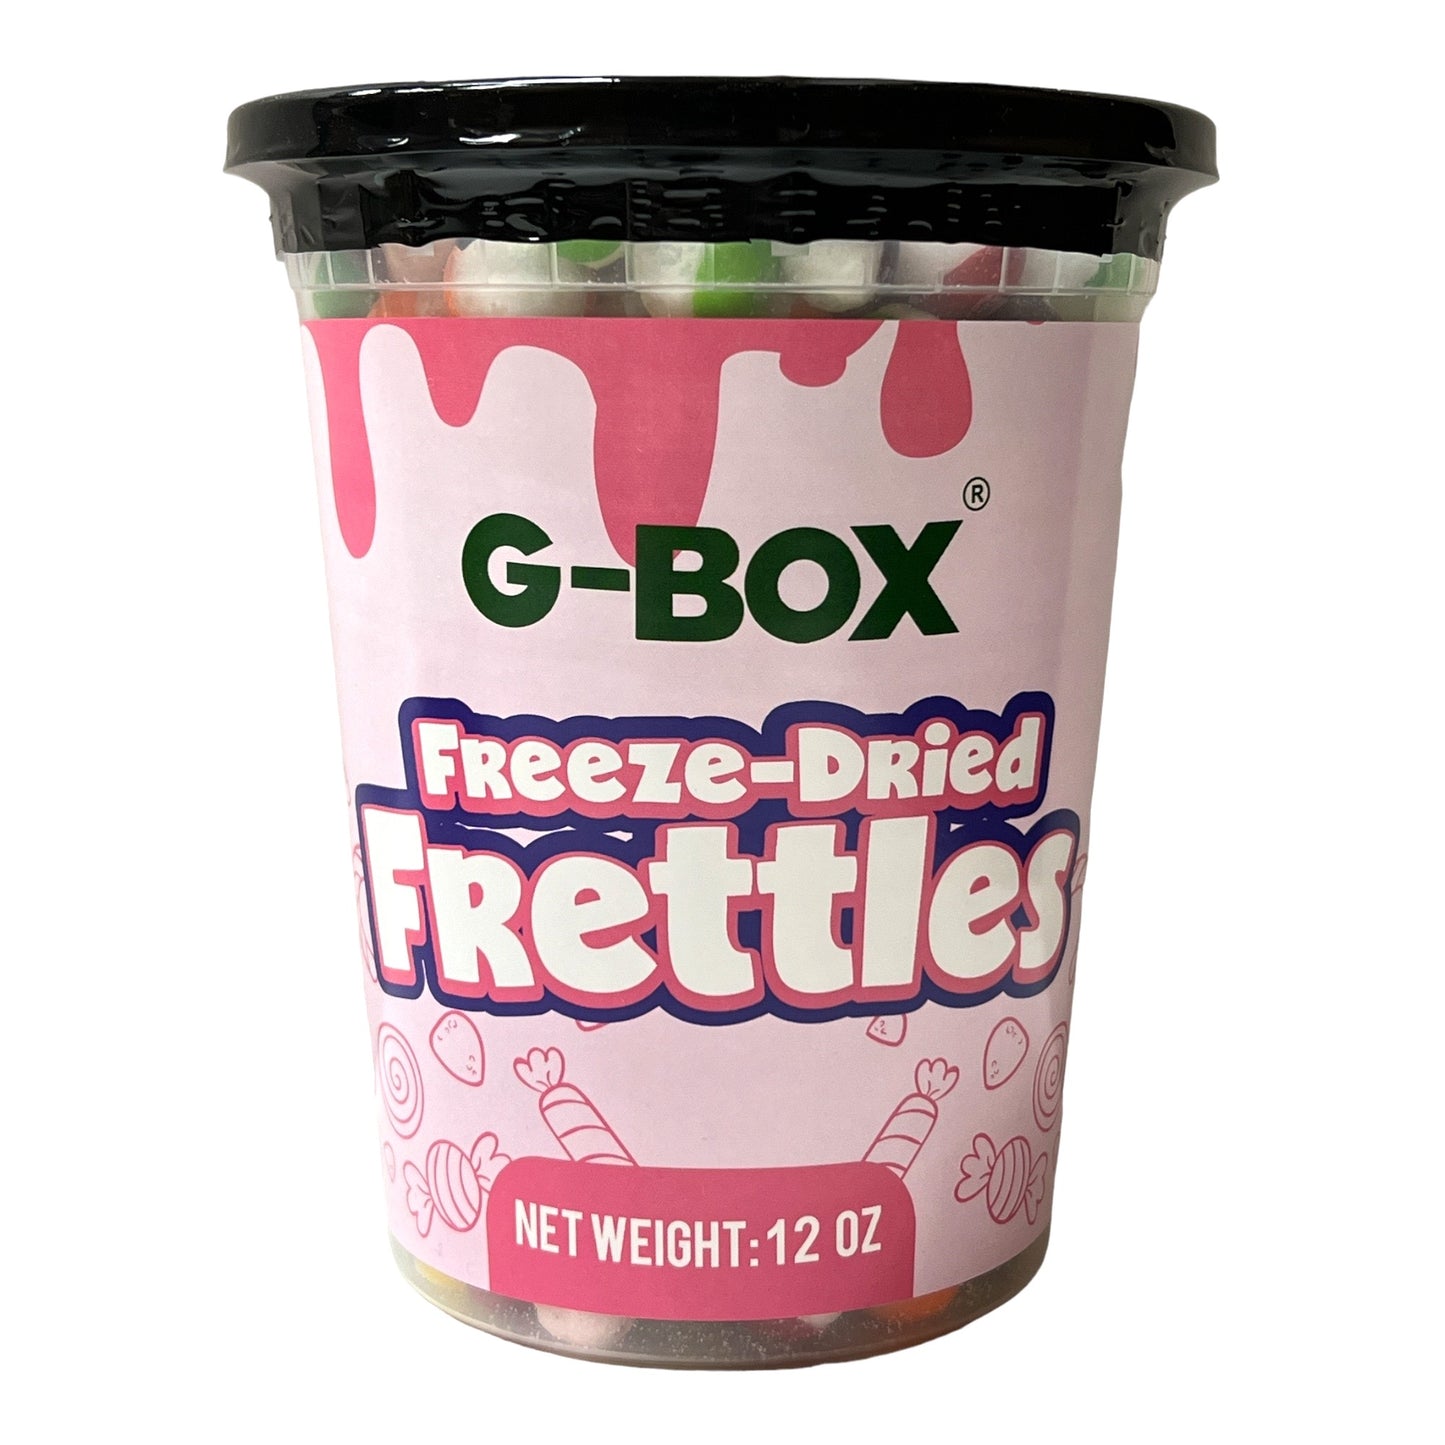 G-Box Freeze Dried Frettles Original Flavor Air-tight Sealed in a Deli Container